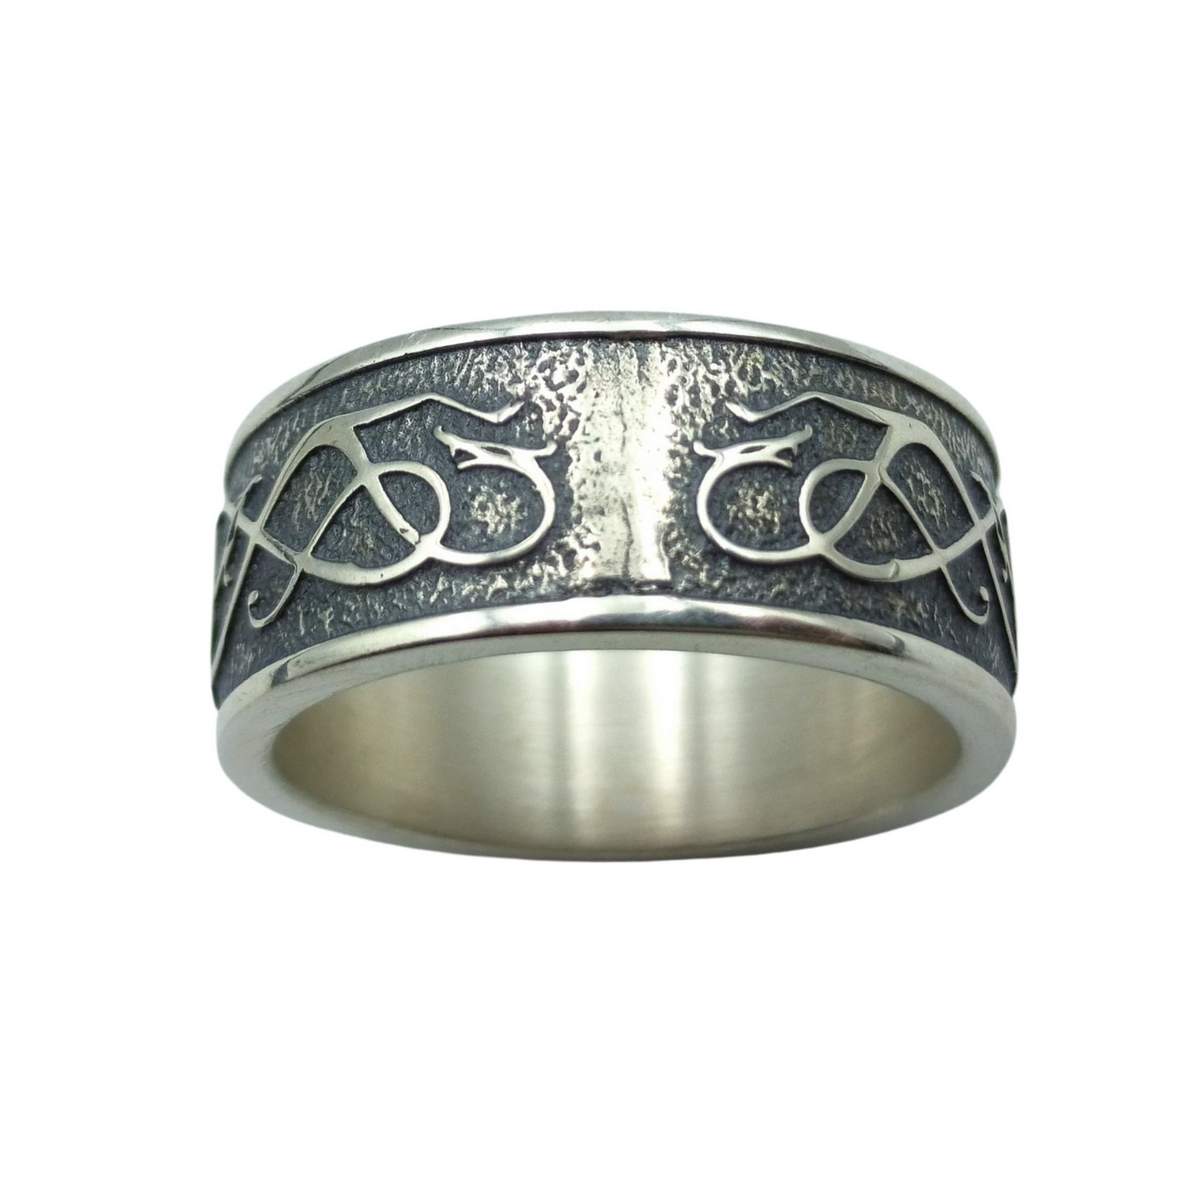 Norse Urnes ornament silver rings   